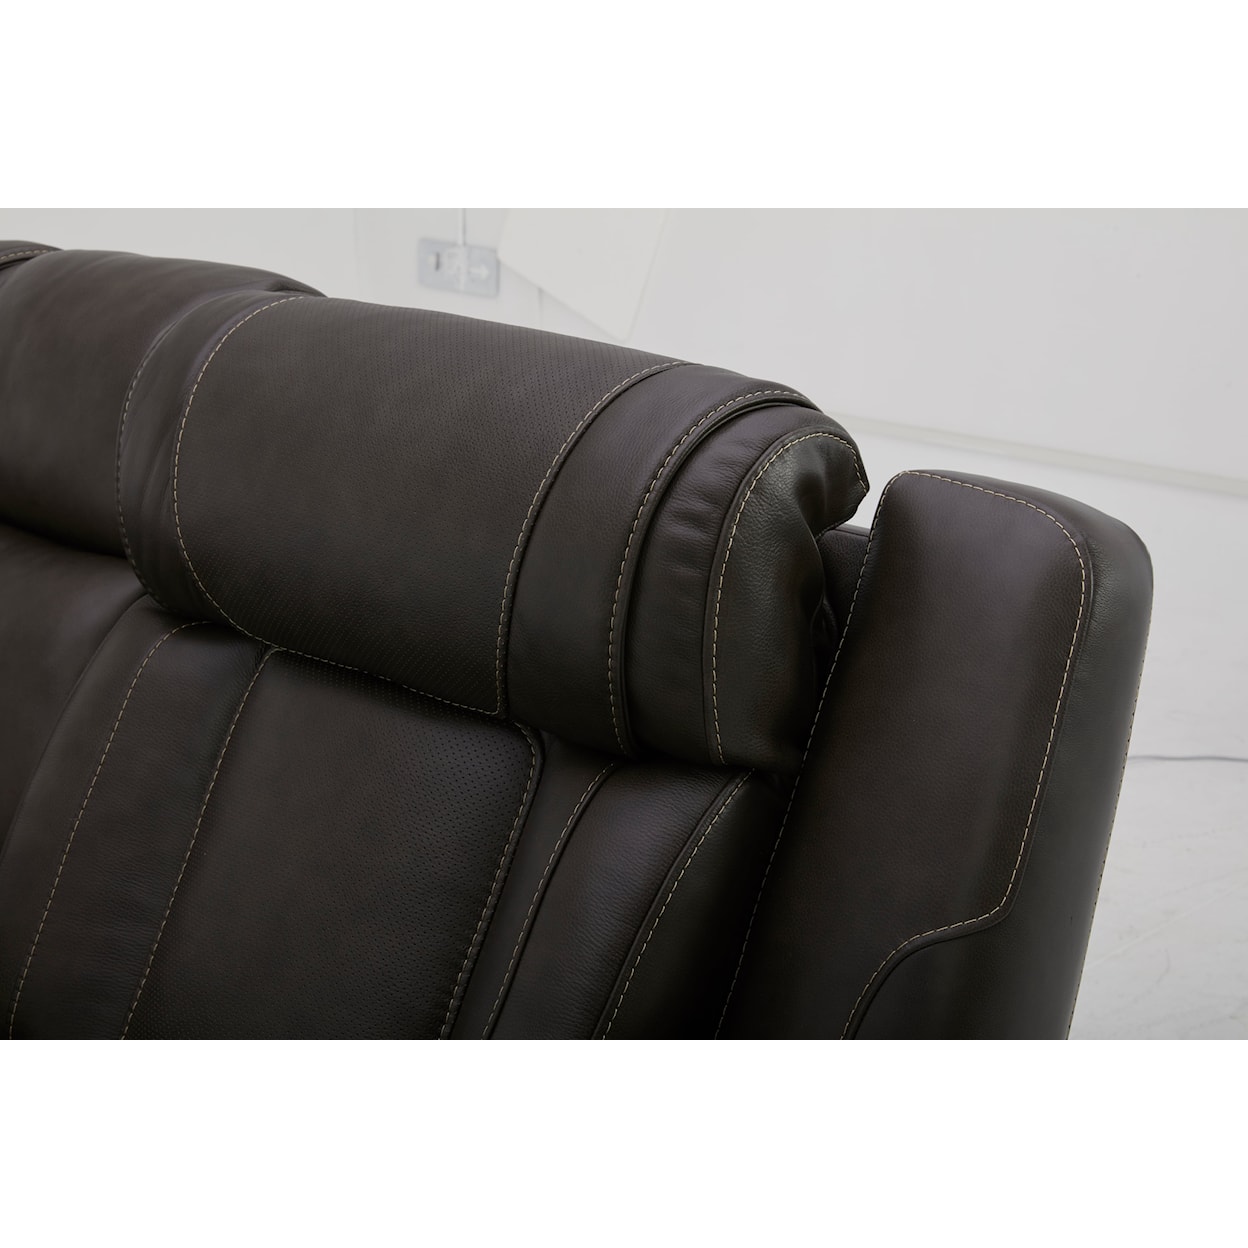 Kuka Home 615 Transformer Leather Collection 6153 Charcoal Dual Power Loveseat